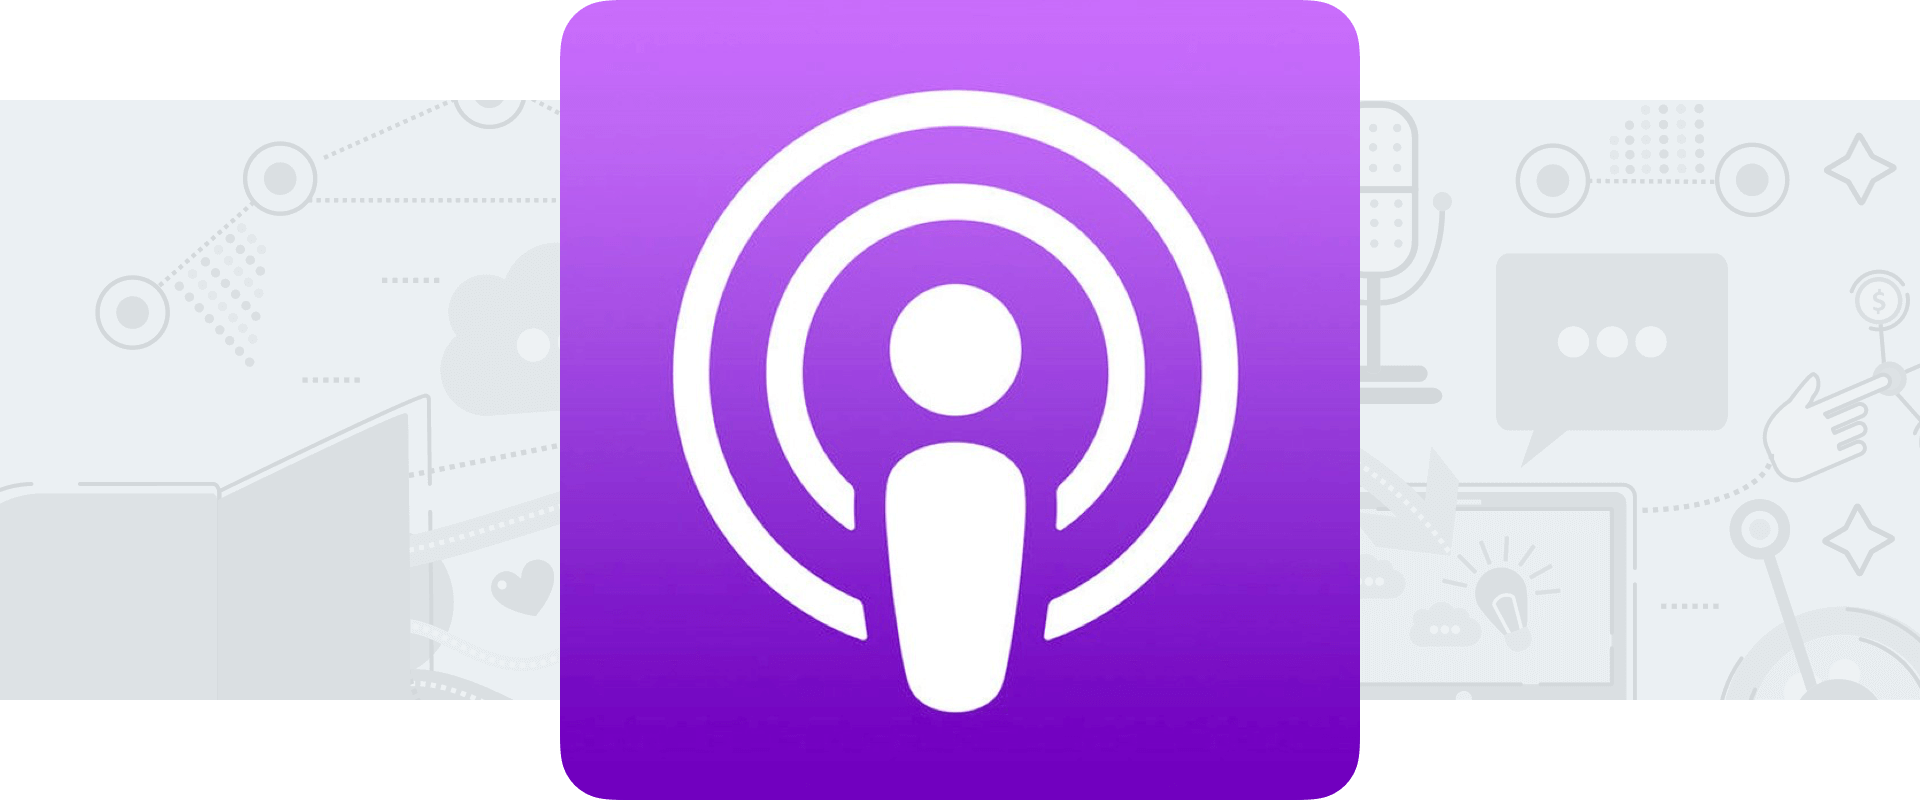 Athletic Motion Golf- The Podcast on Apple Podcasts